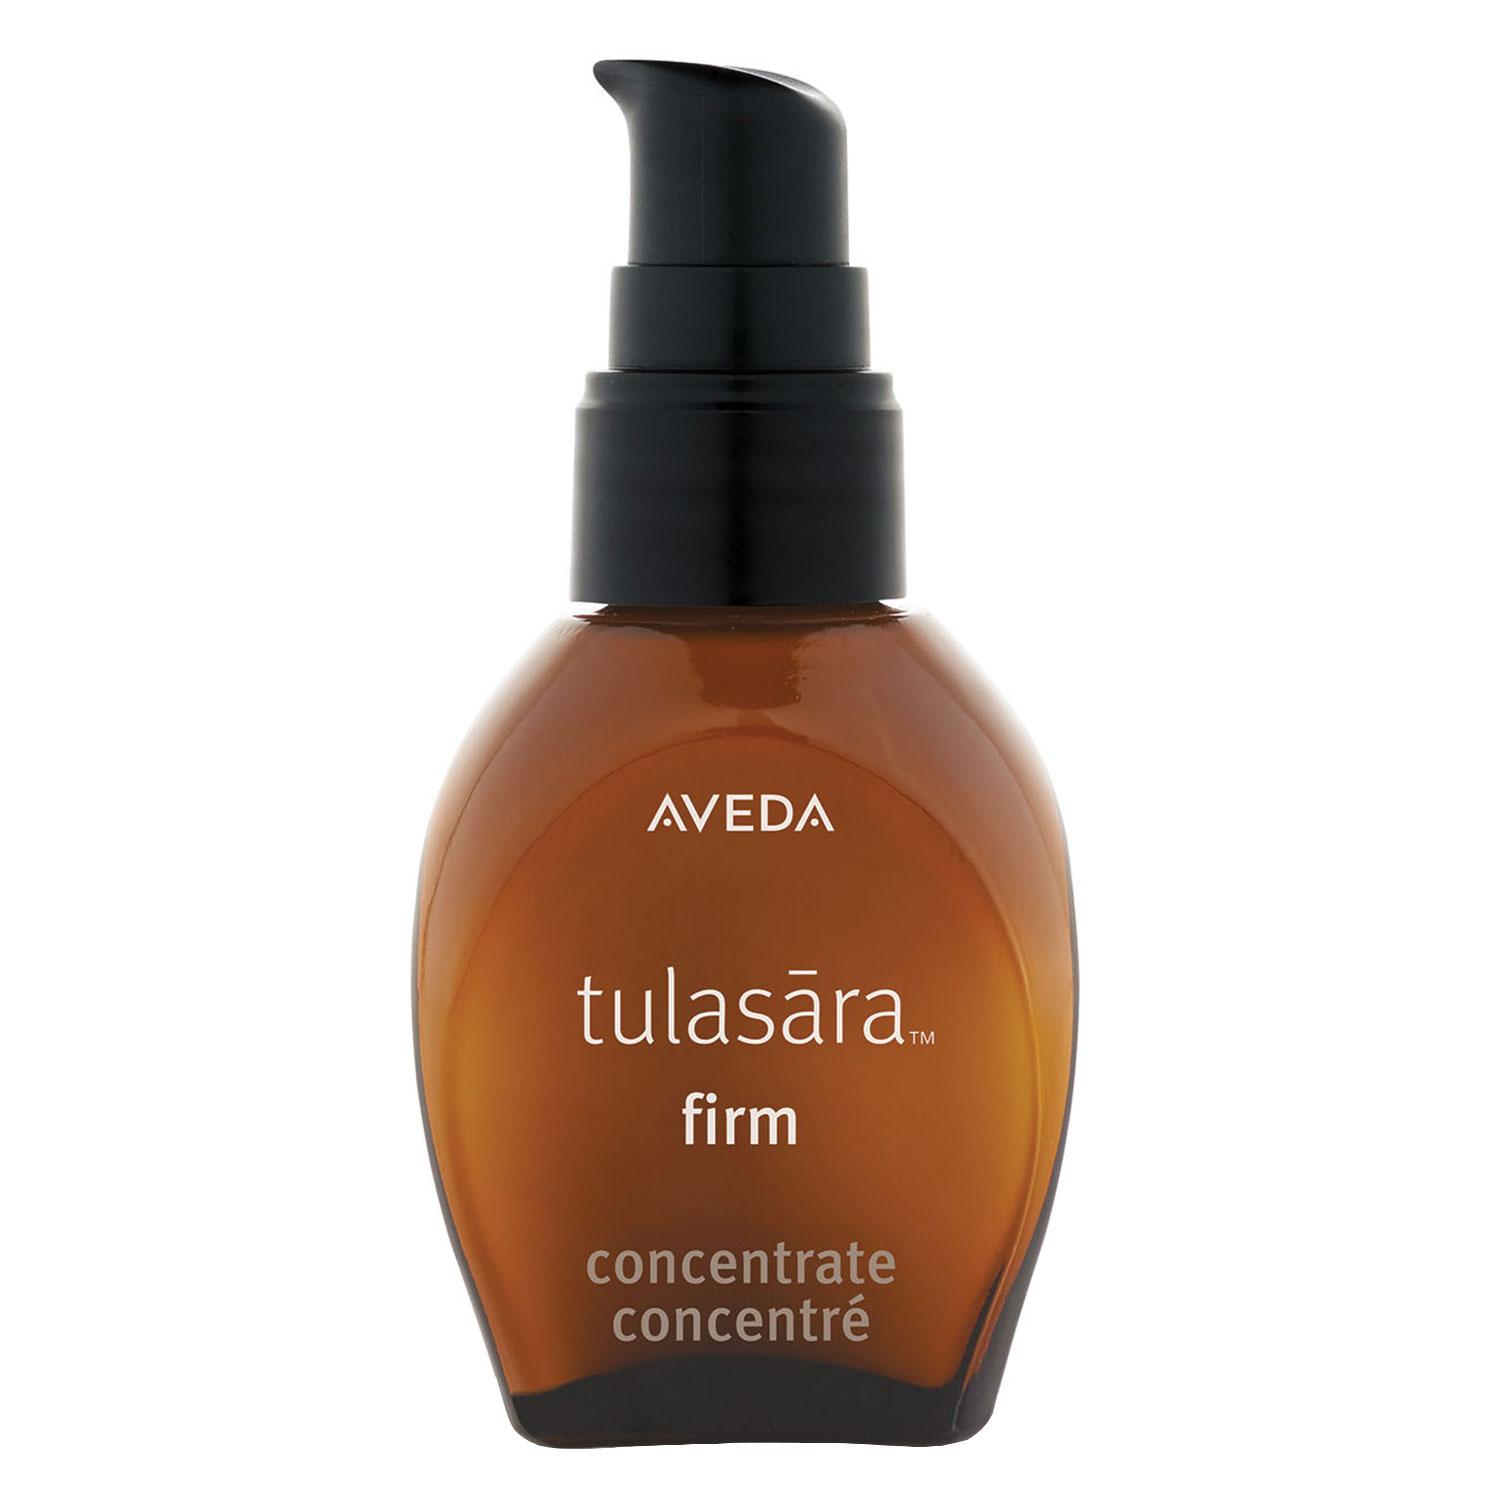 tulasara - firm concentrate